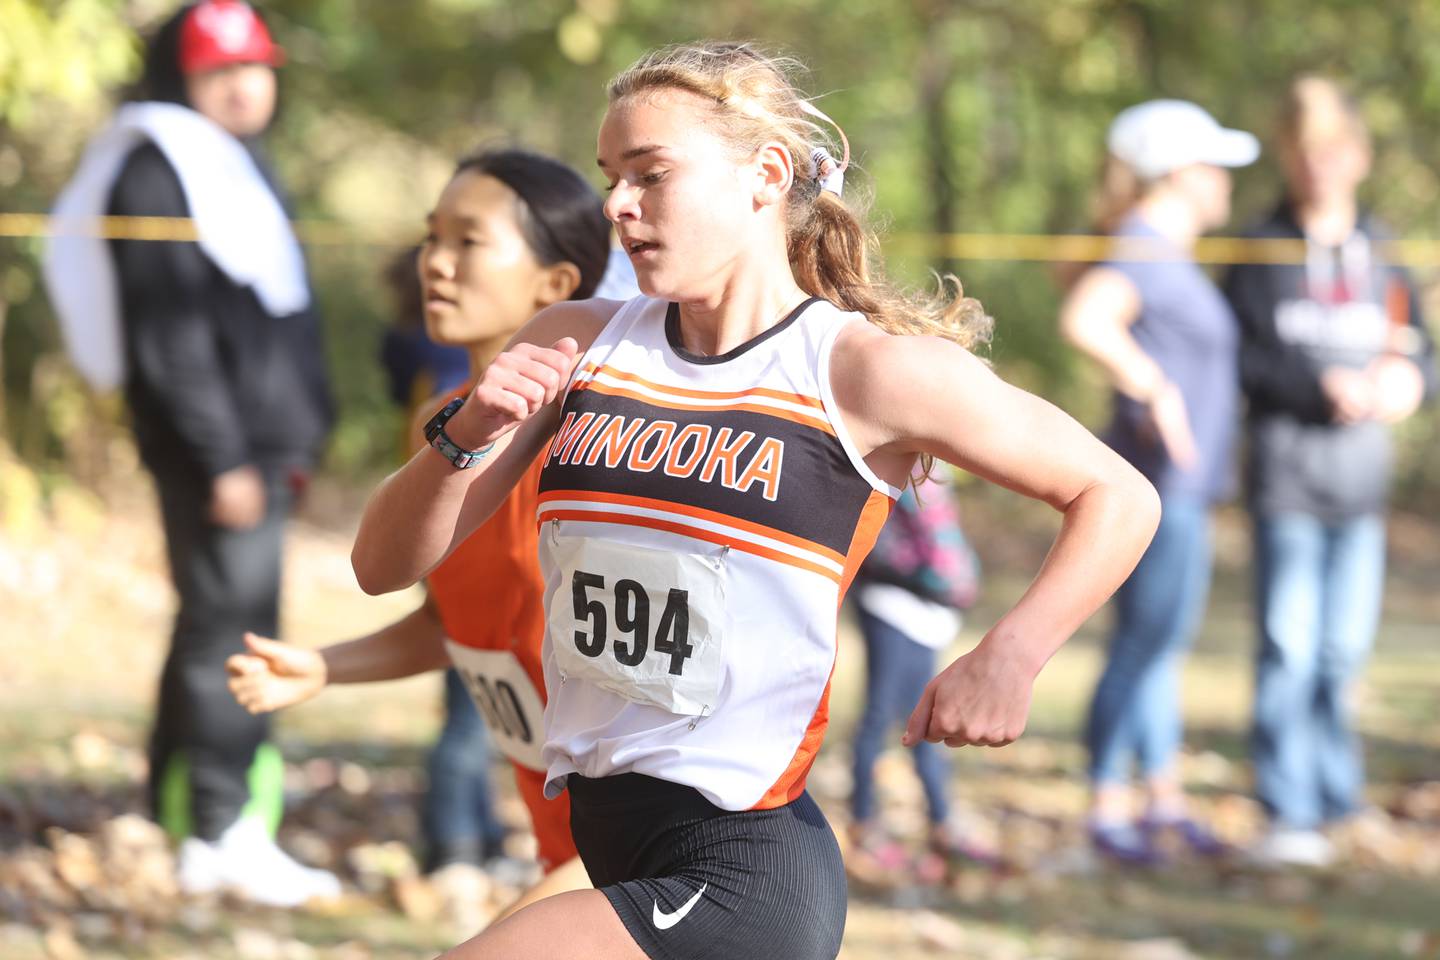 Minooka’s Ella McCollum passes Oswego’s Kelly Wong yards away from the finish line to finish 4th in the Girls Cross Country Class 3A Minooka Regional at Channahon Community Park on Saturday.